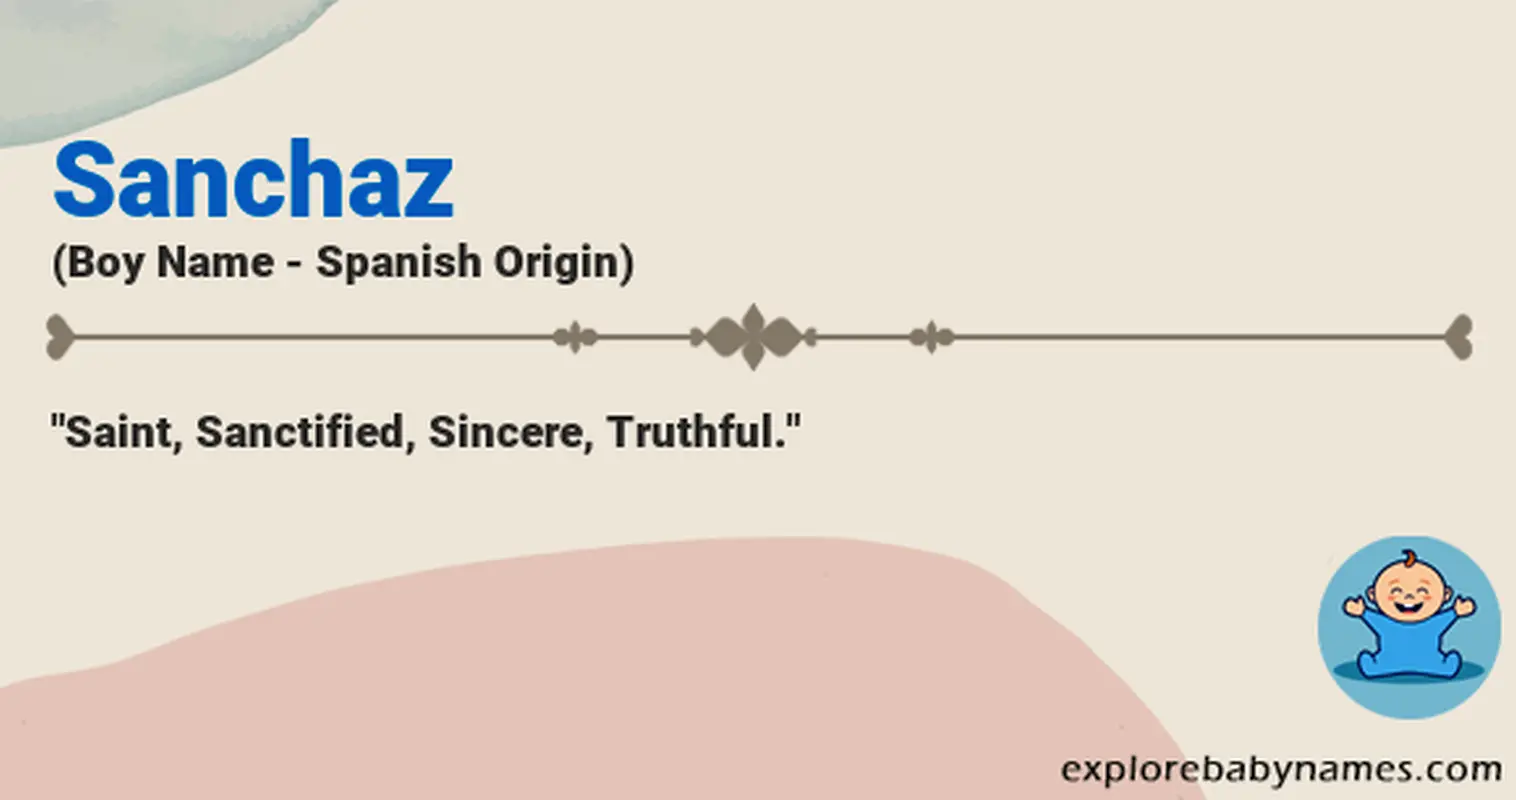 Meaning of Sanchaz